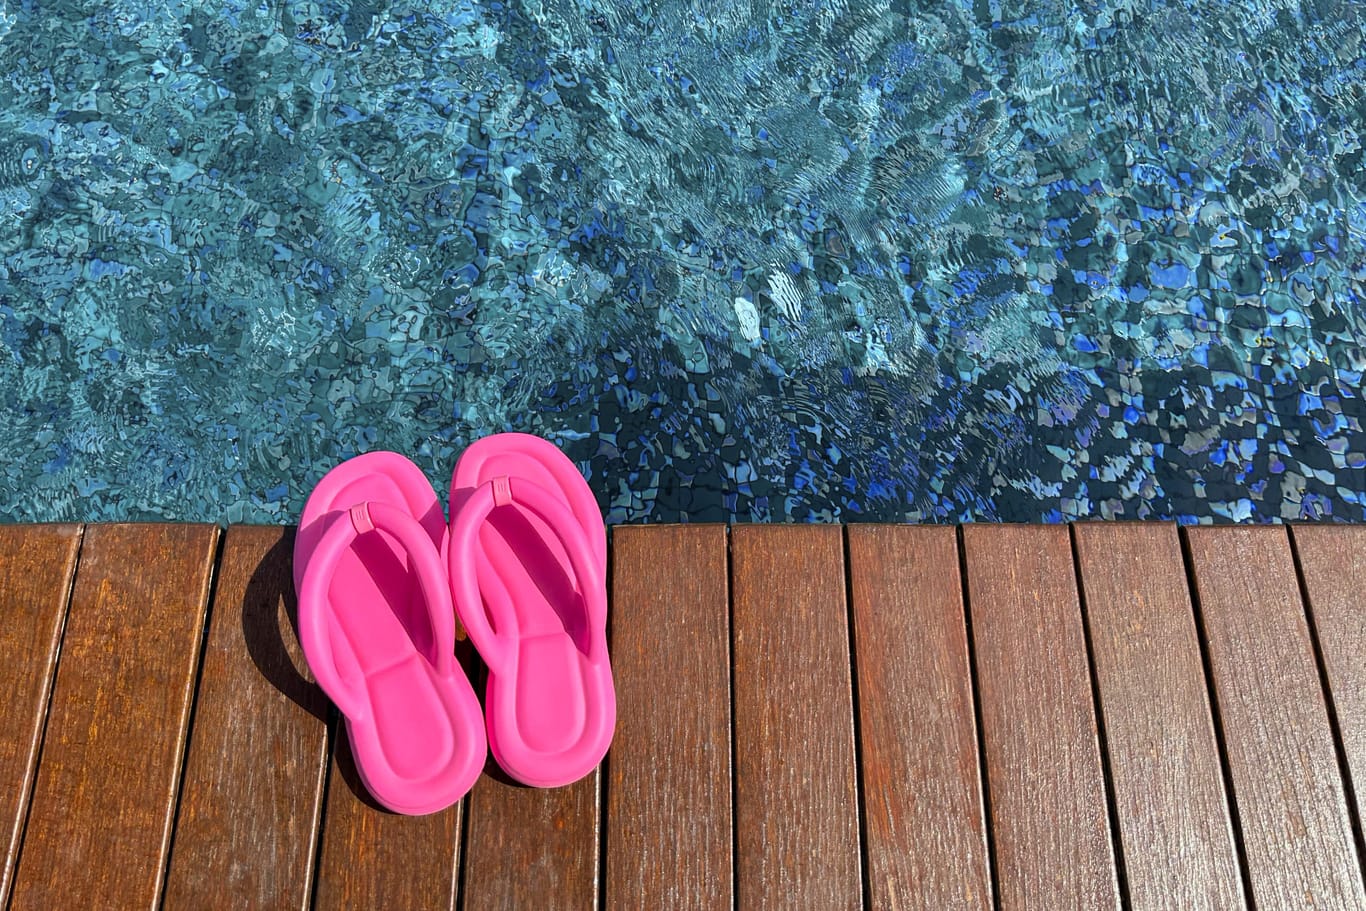 Clear rippled water in swimming pool and pink flip-flops on wooden deck outdoors, above view. Space for text